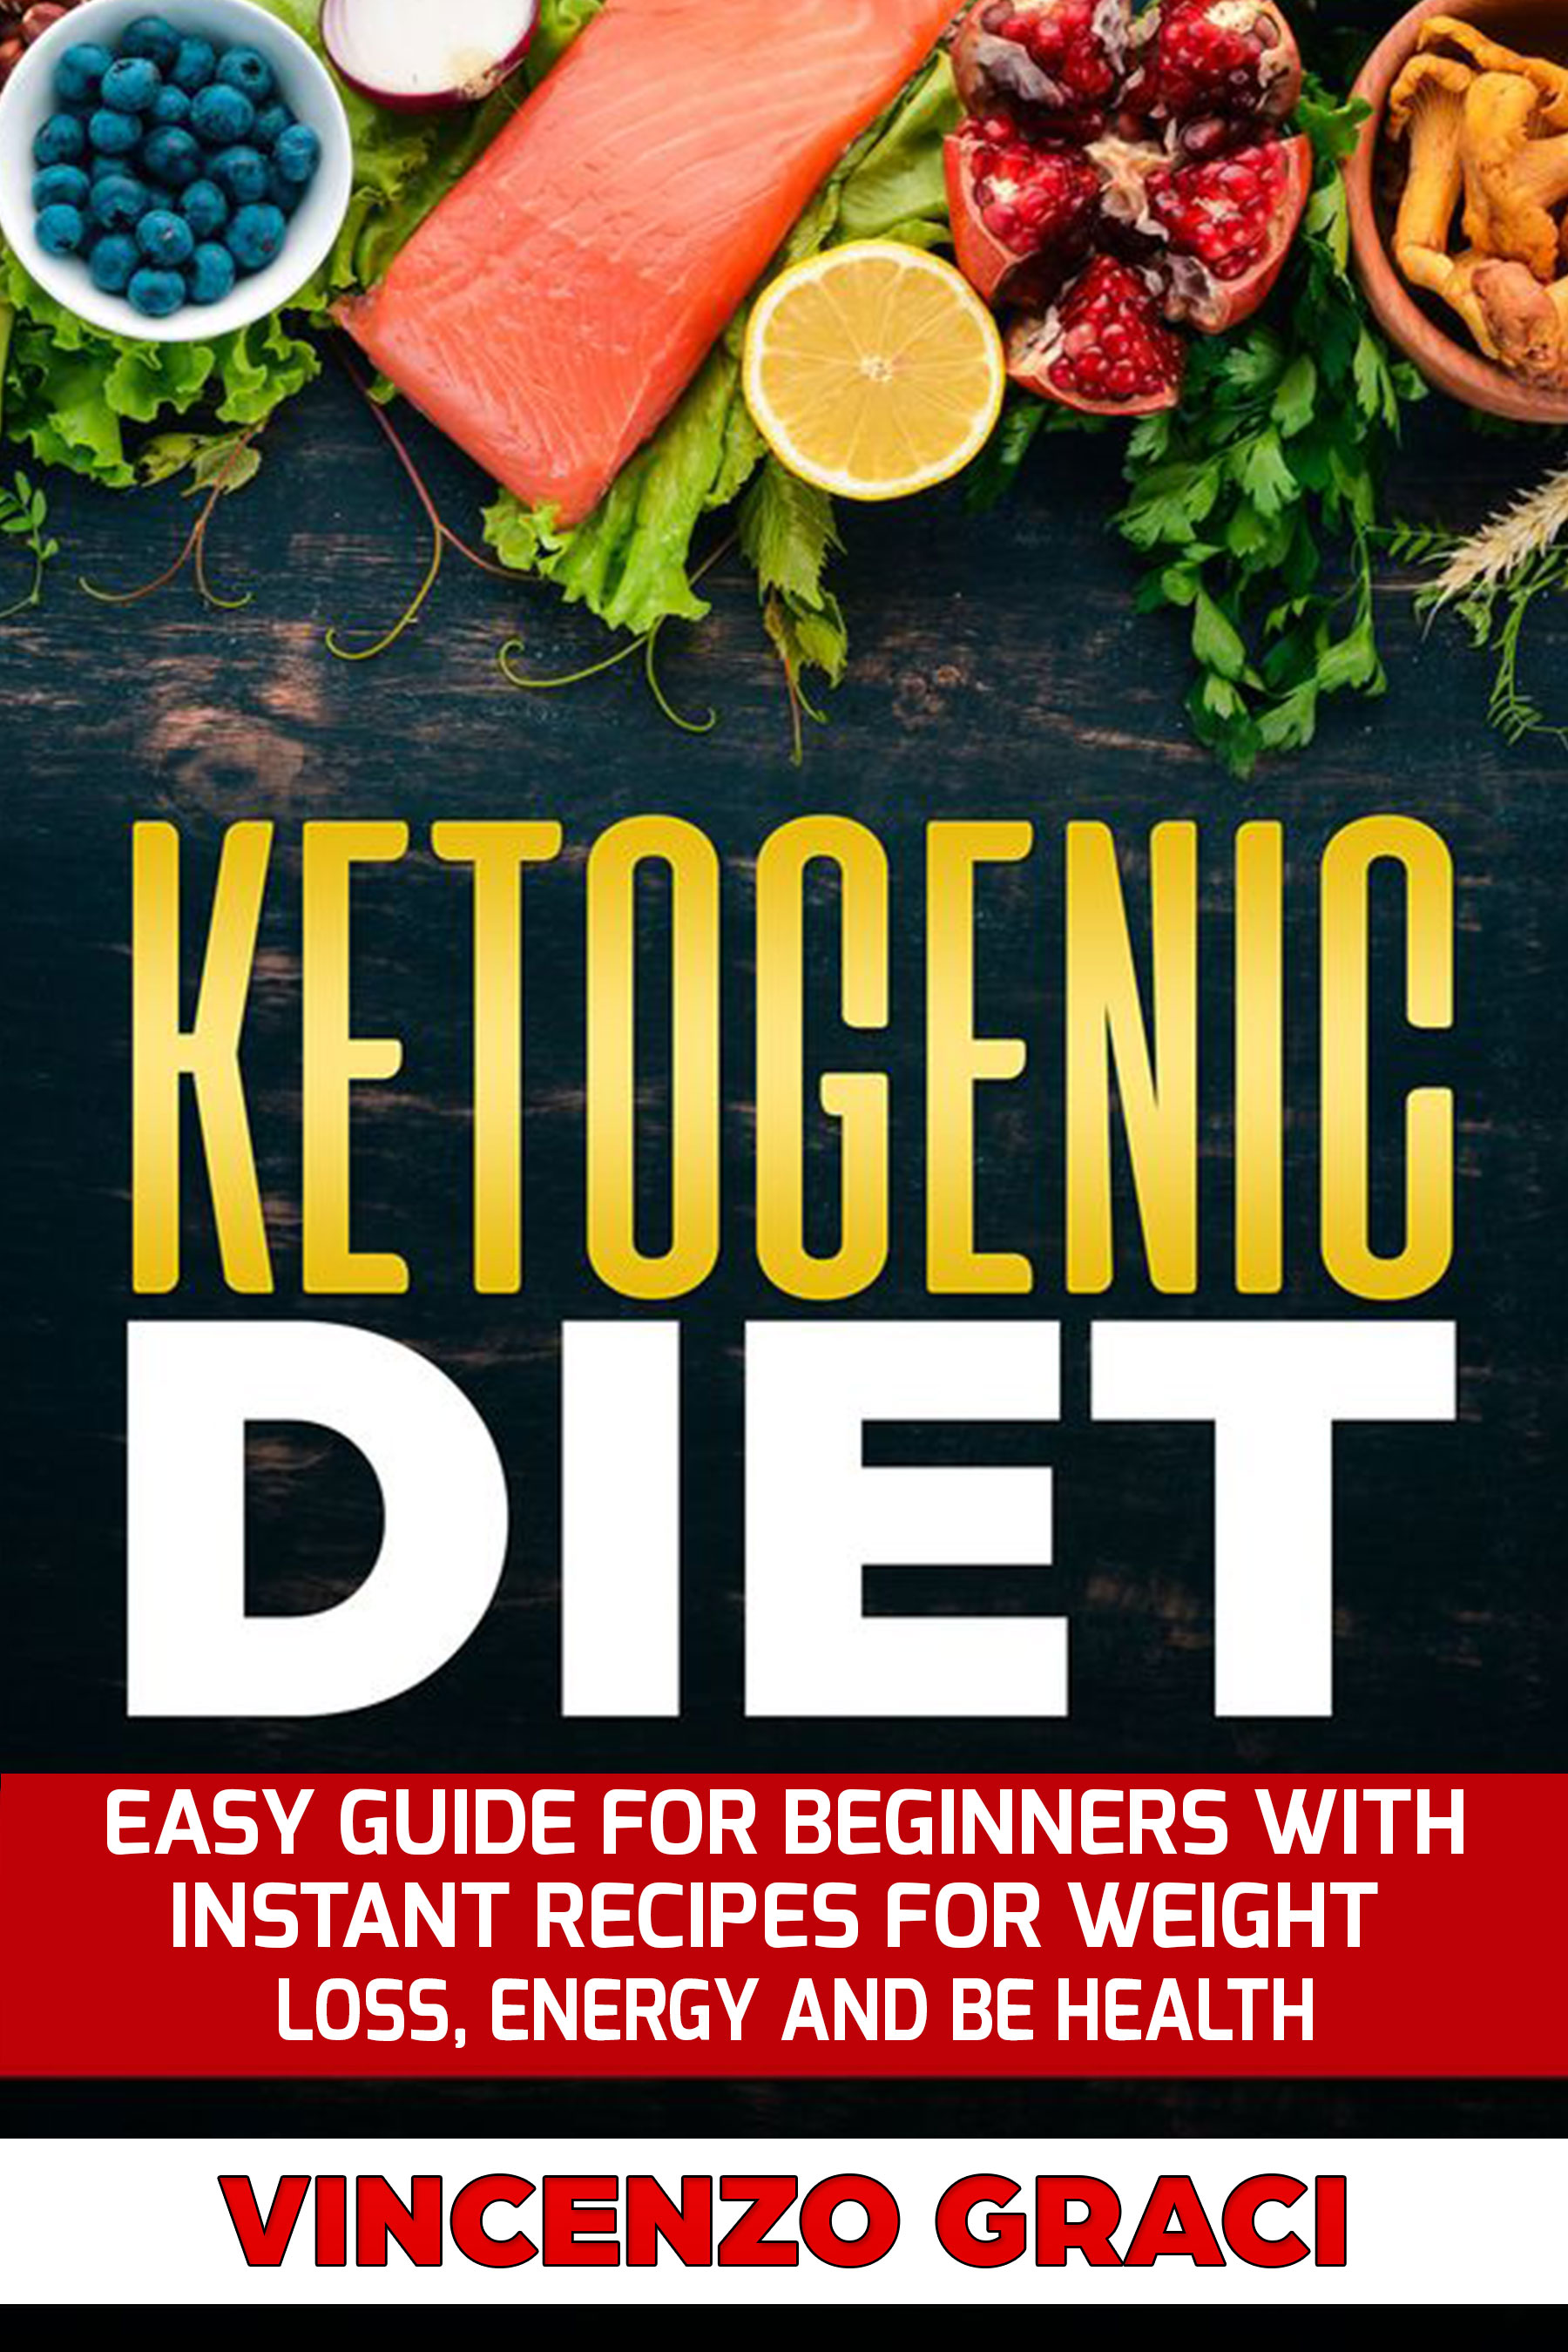 FREE: KETOGENIC DIET: Easy Guide For Beginners With Instant Recipes For Weight Loss,Energy and Be Health by vincenzo graci